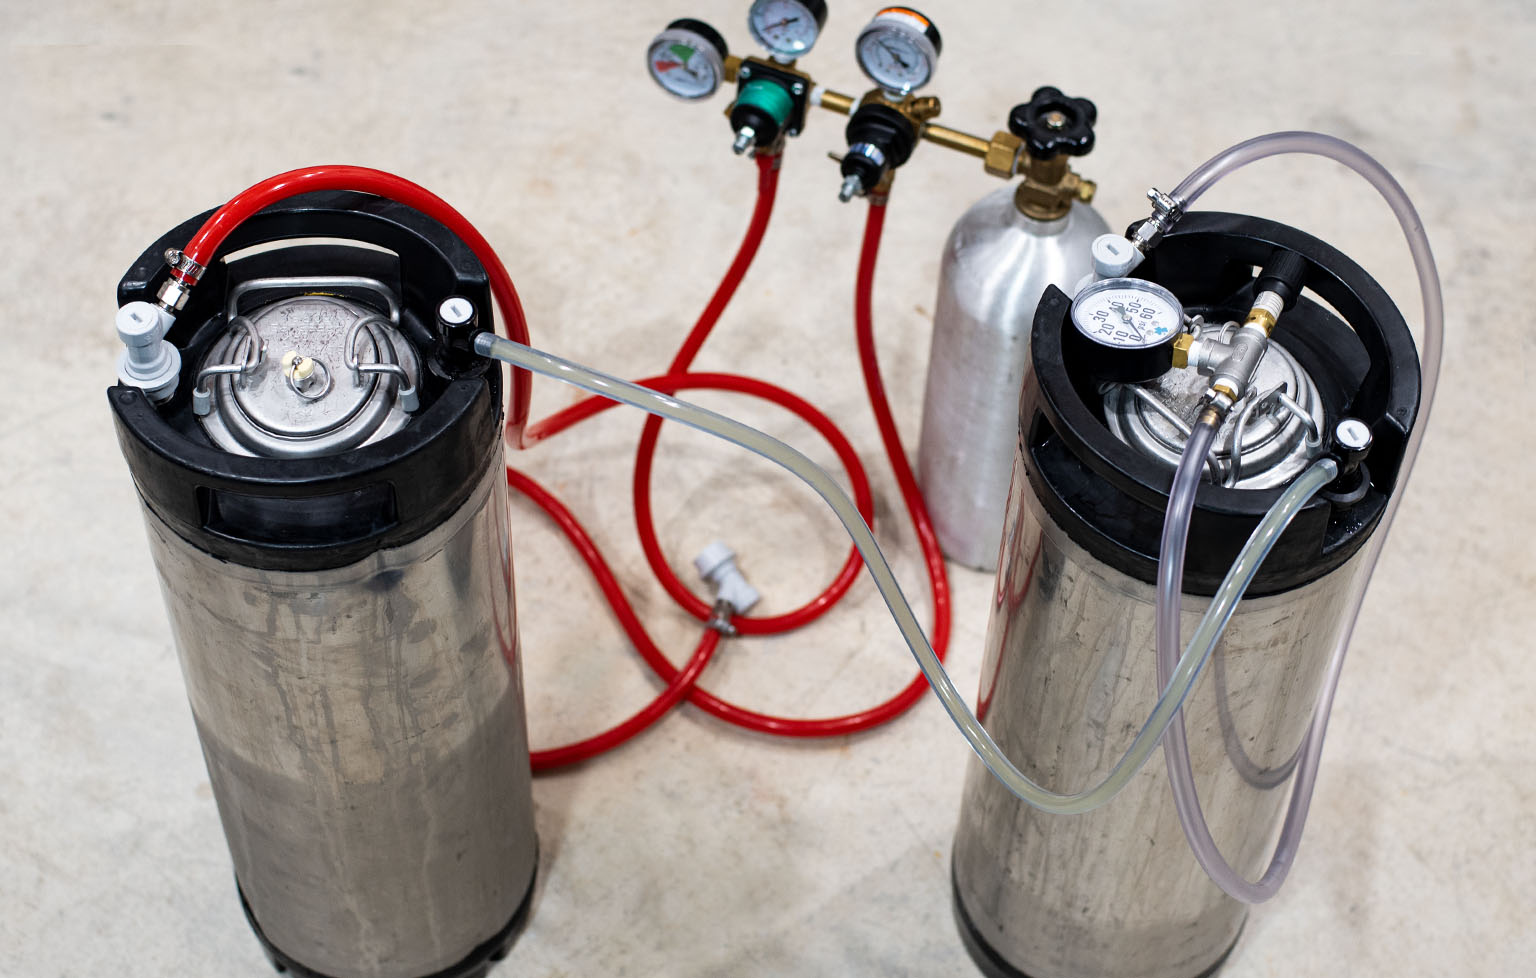 How To DIY Fix A Kegerator That Won’t Run After A Power Surge